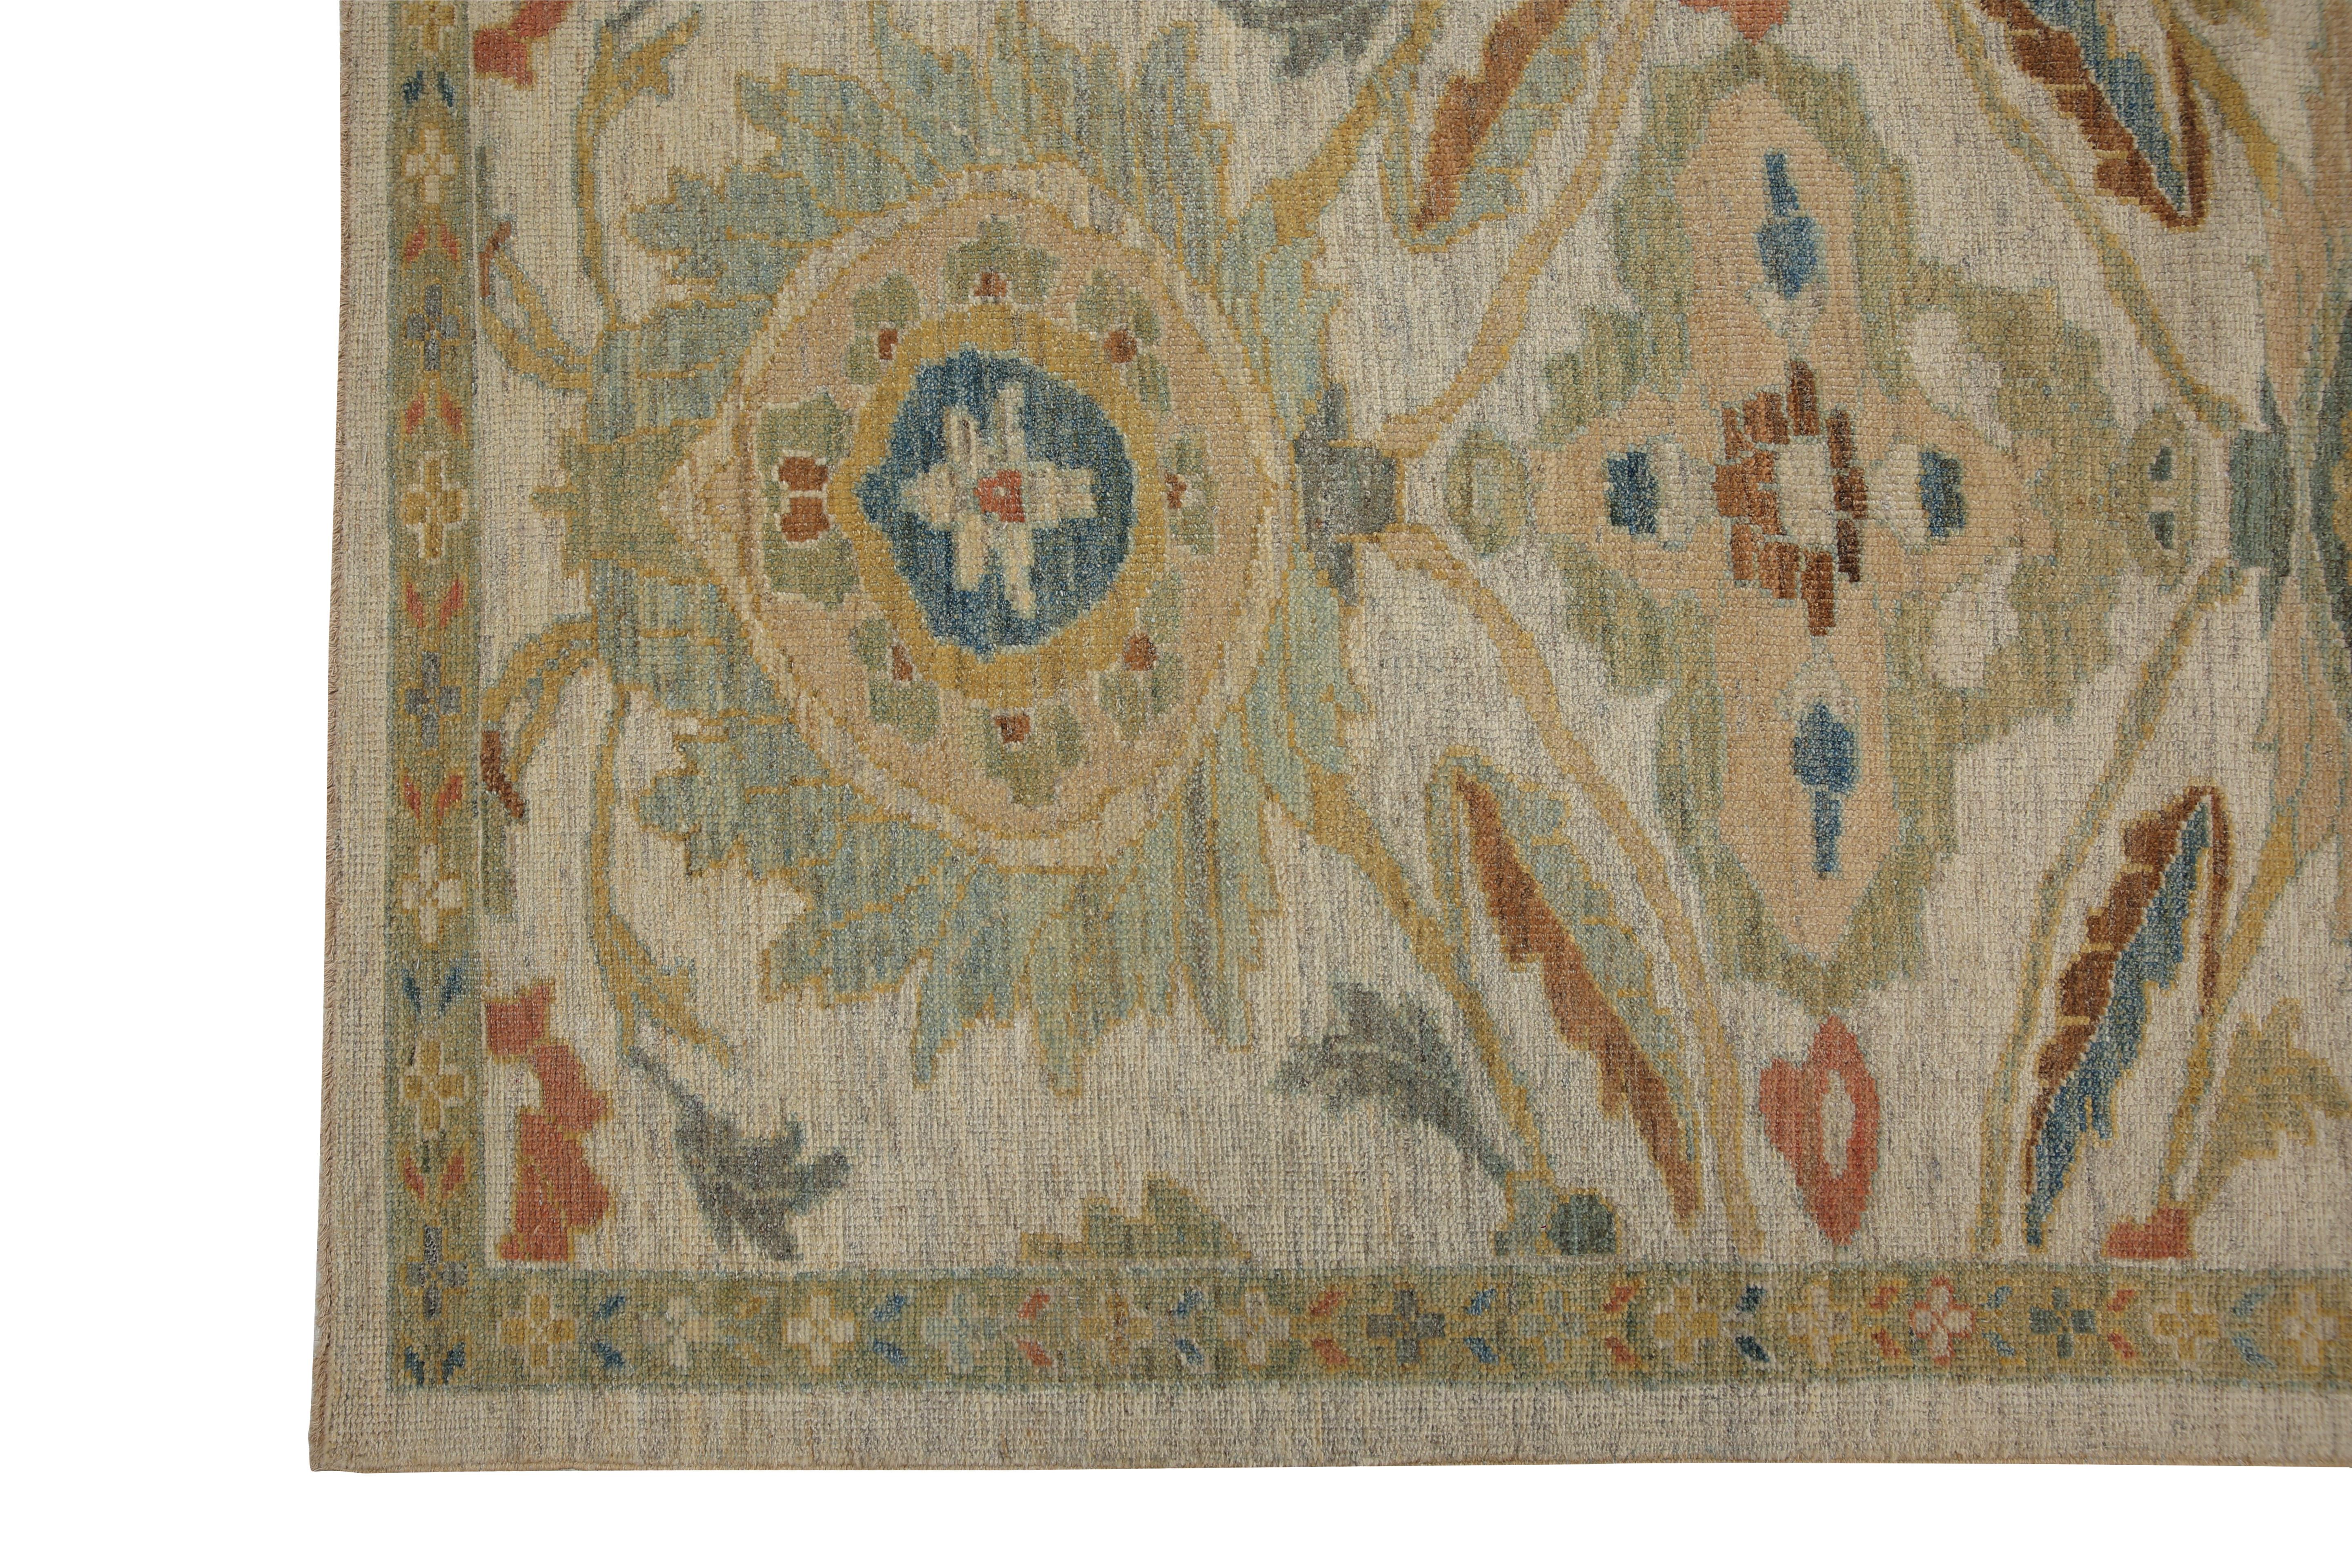 Hand-Woven Luxurious Handmade Sultanabad Rug - Transitional Design, Blue, Orange, Green, Re For Sale